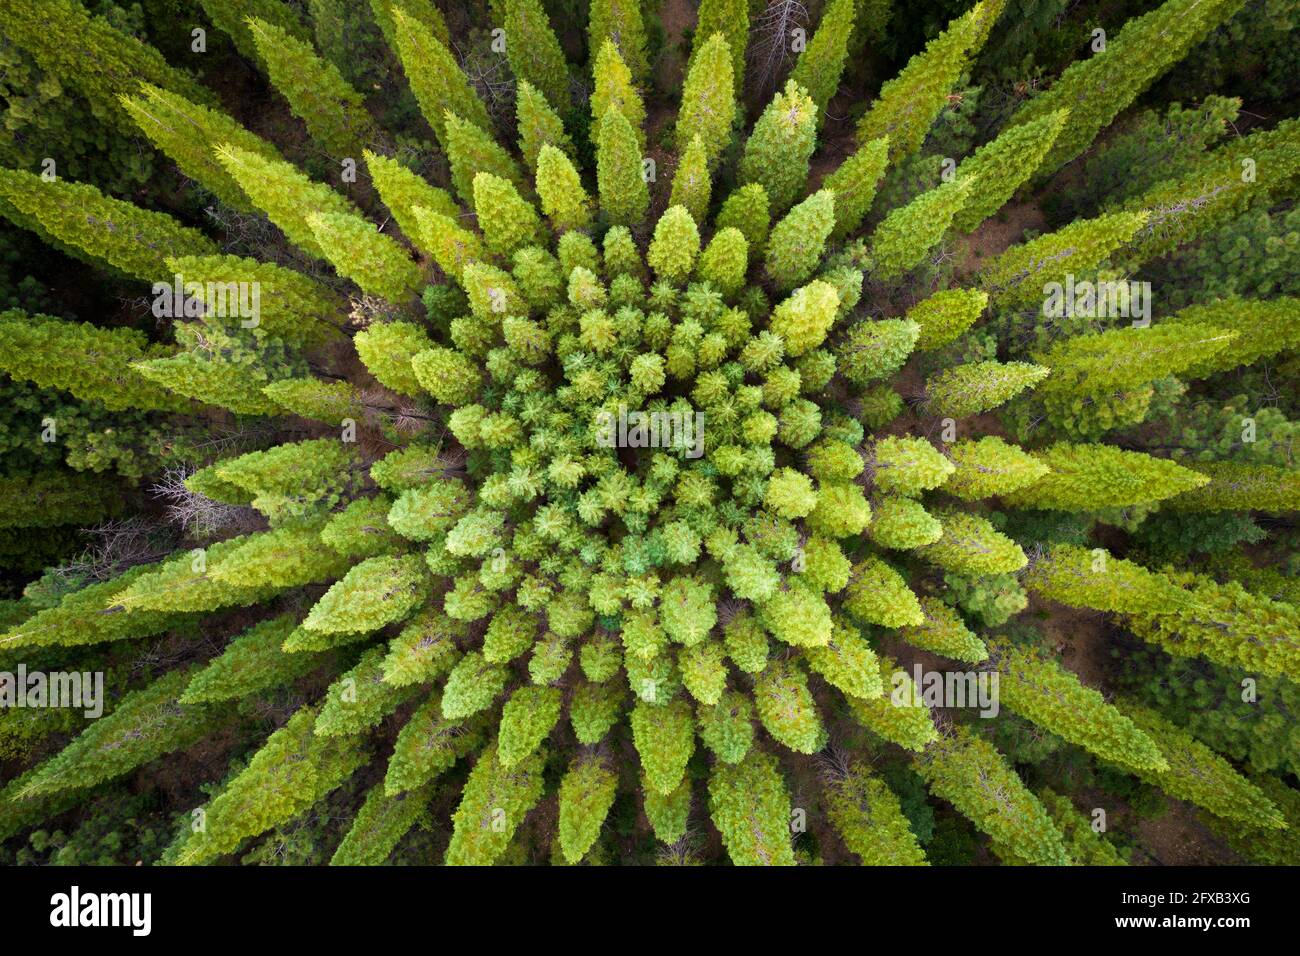 Amazing and unique tree circle in a California pine forest. Stock Photo